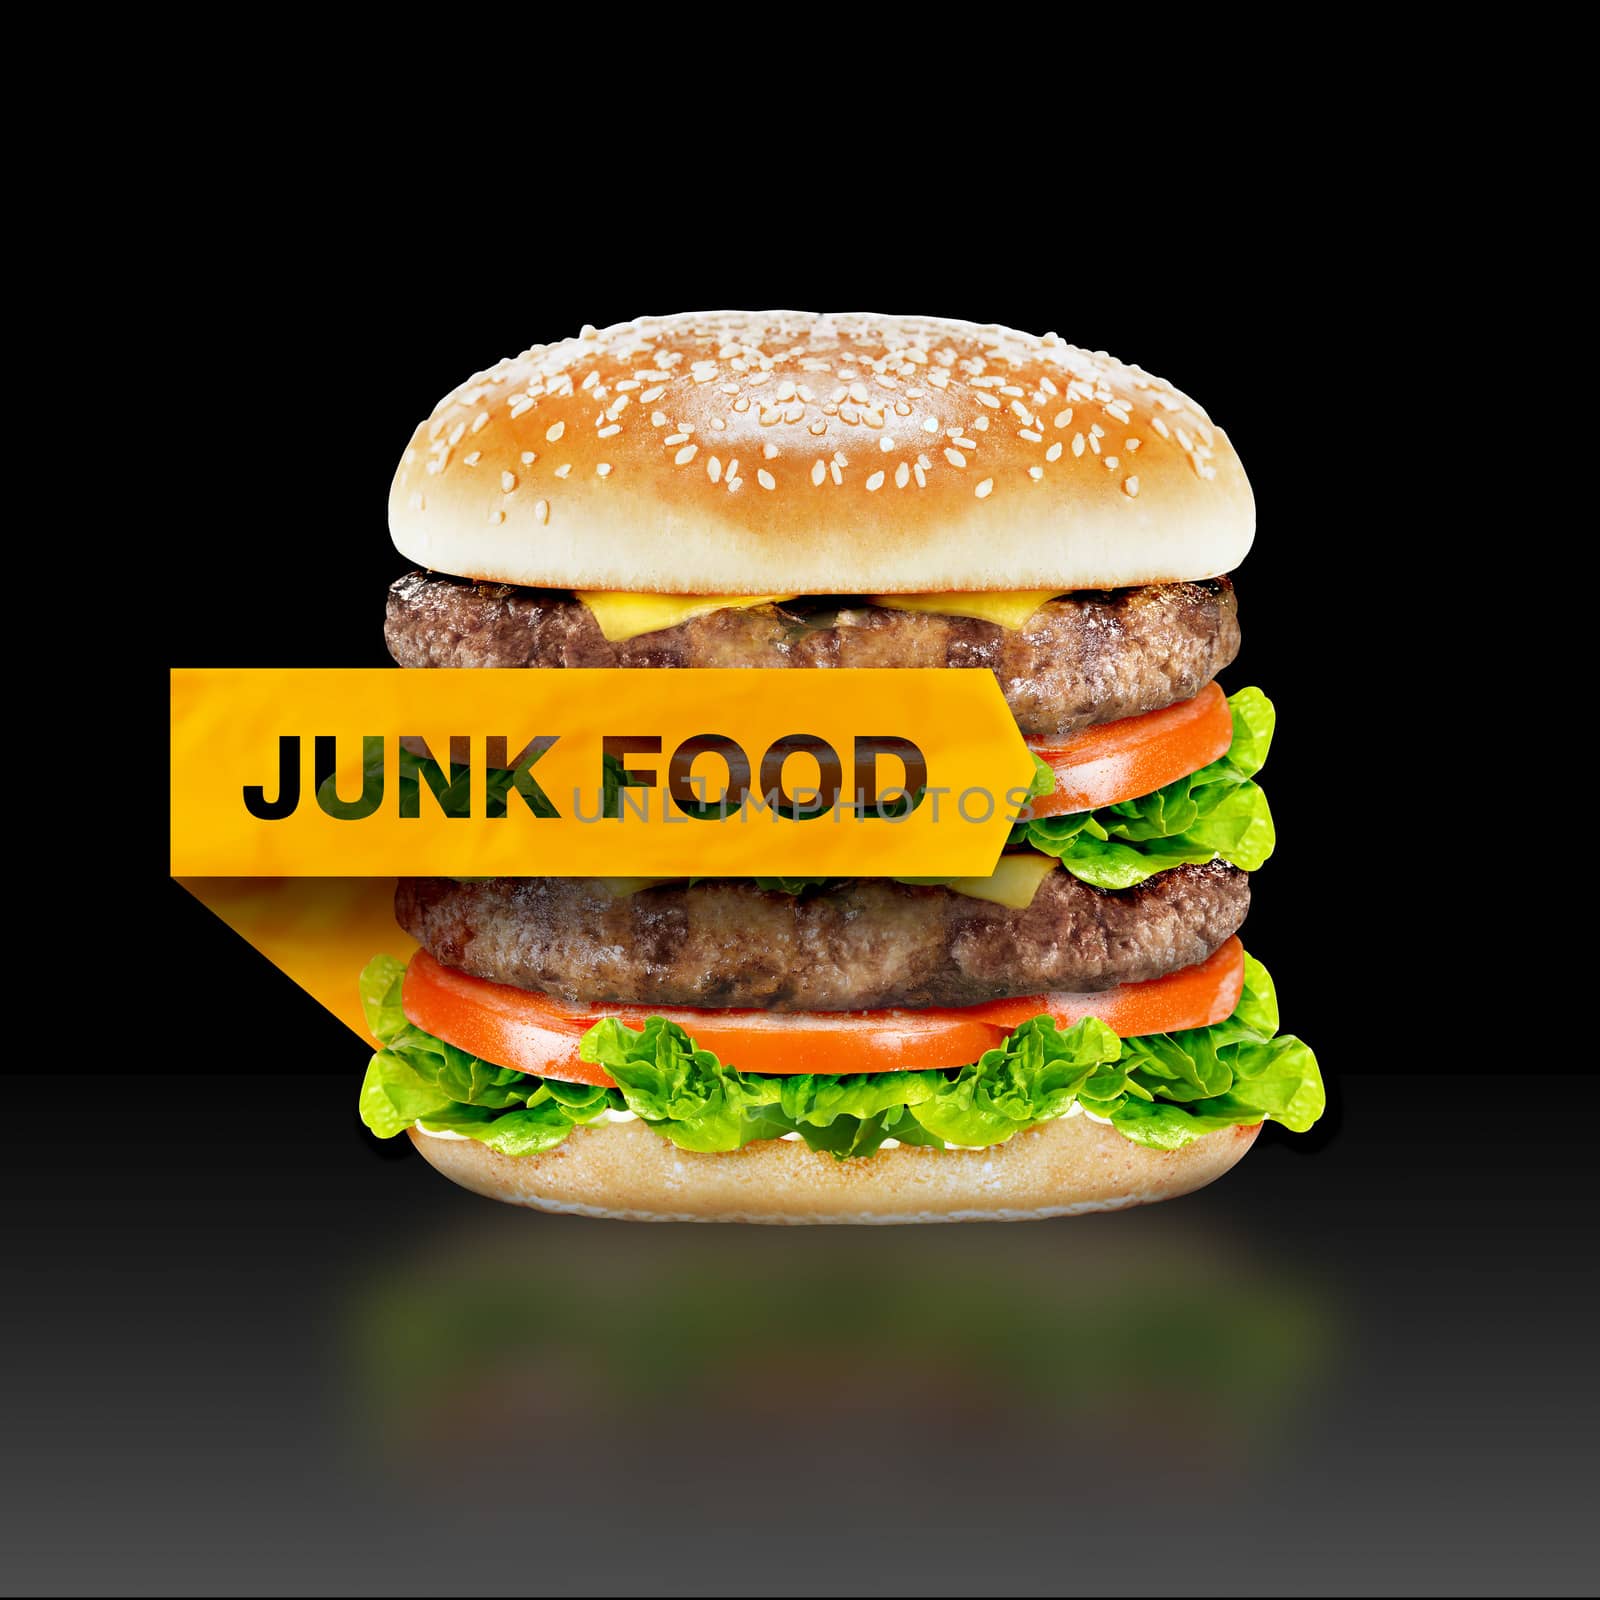 Junk Food, burger with warning message on black background with clipping path.